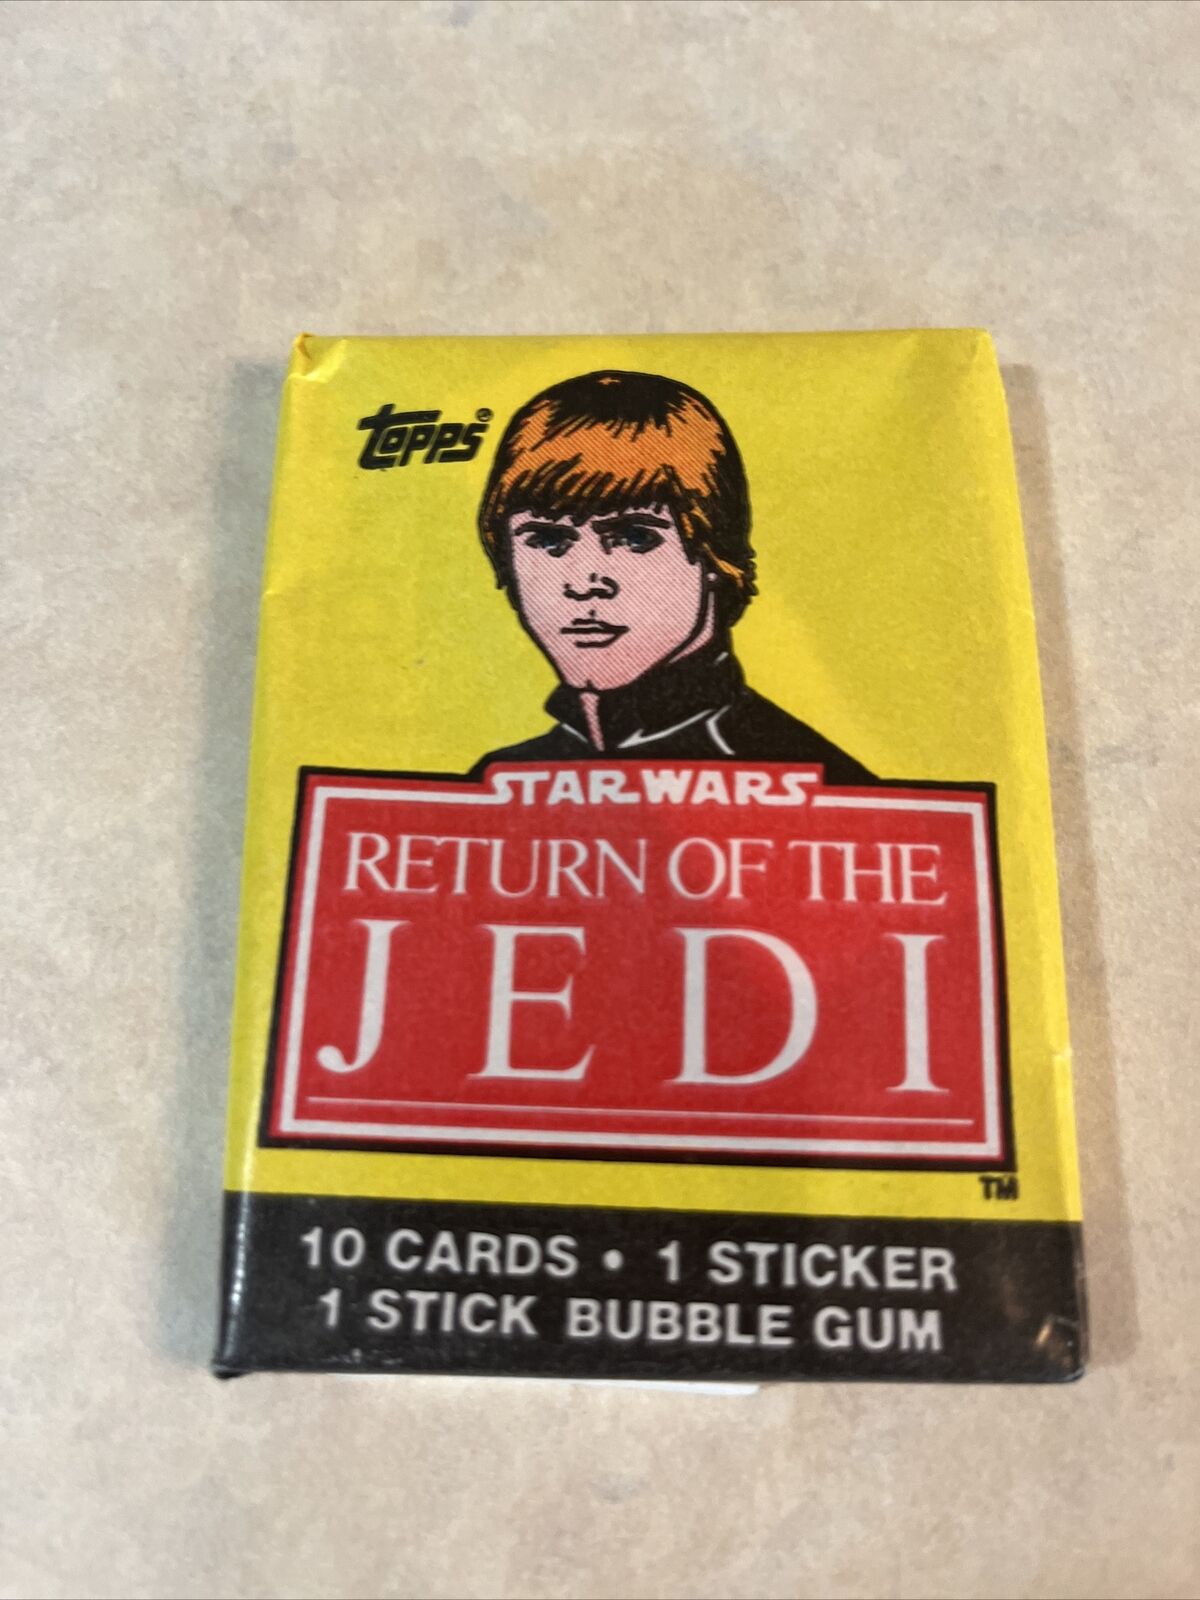 VINTAGE Sealed Wax PACK OF 1983 TOPPS STAR WARS RETURN OF THE JEDI Trading Cards